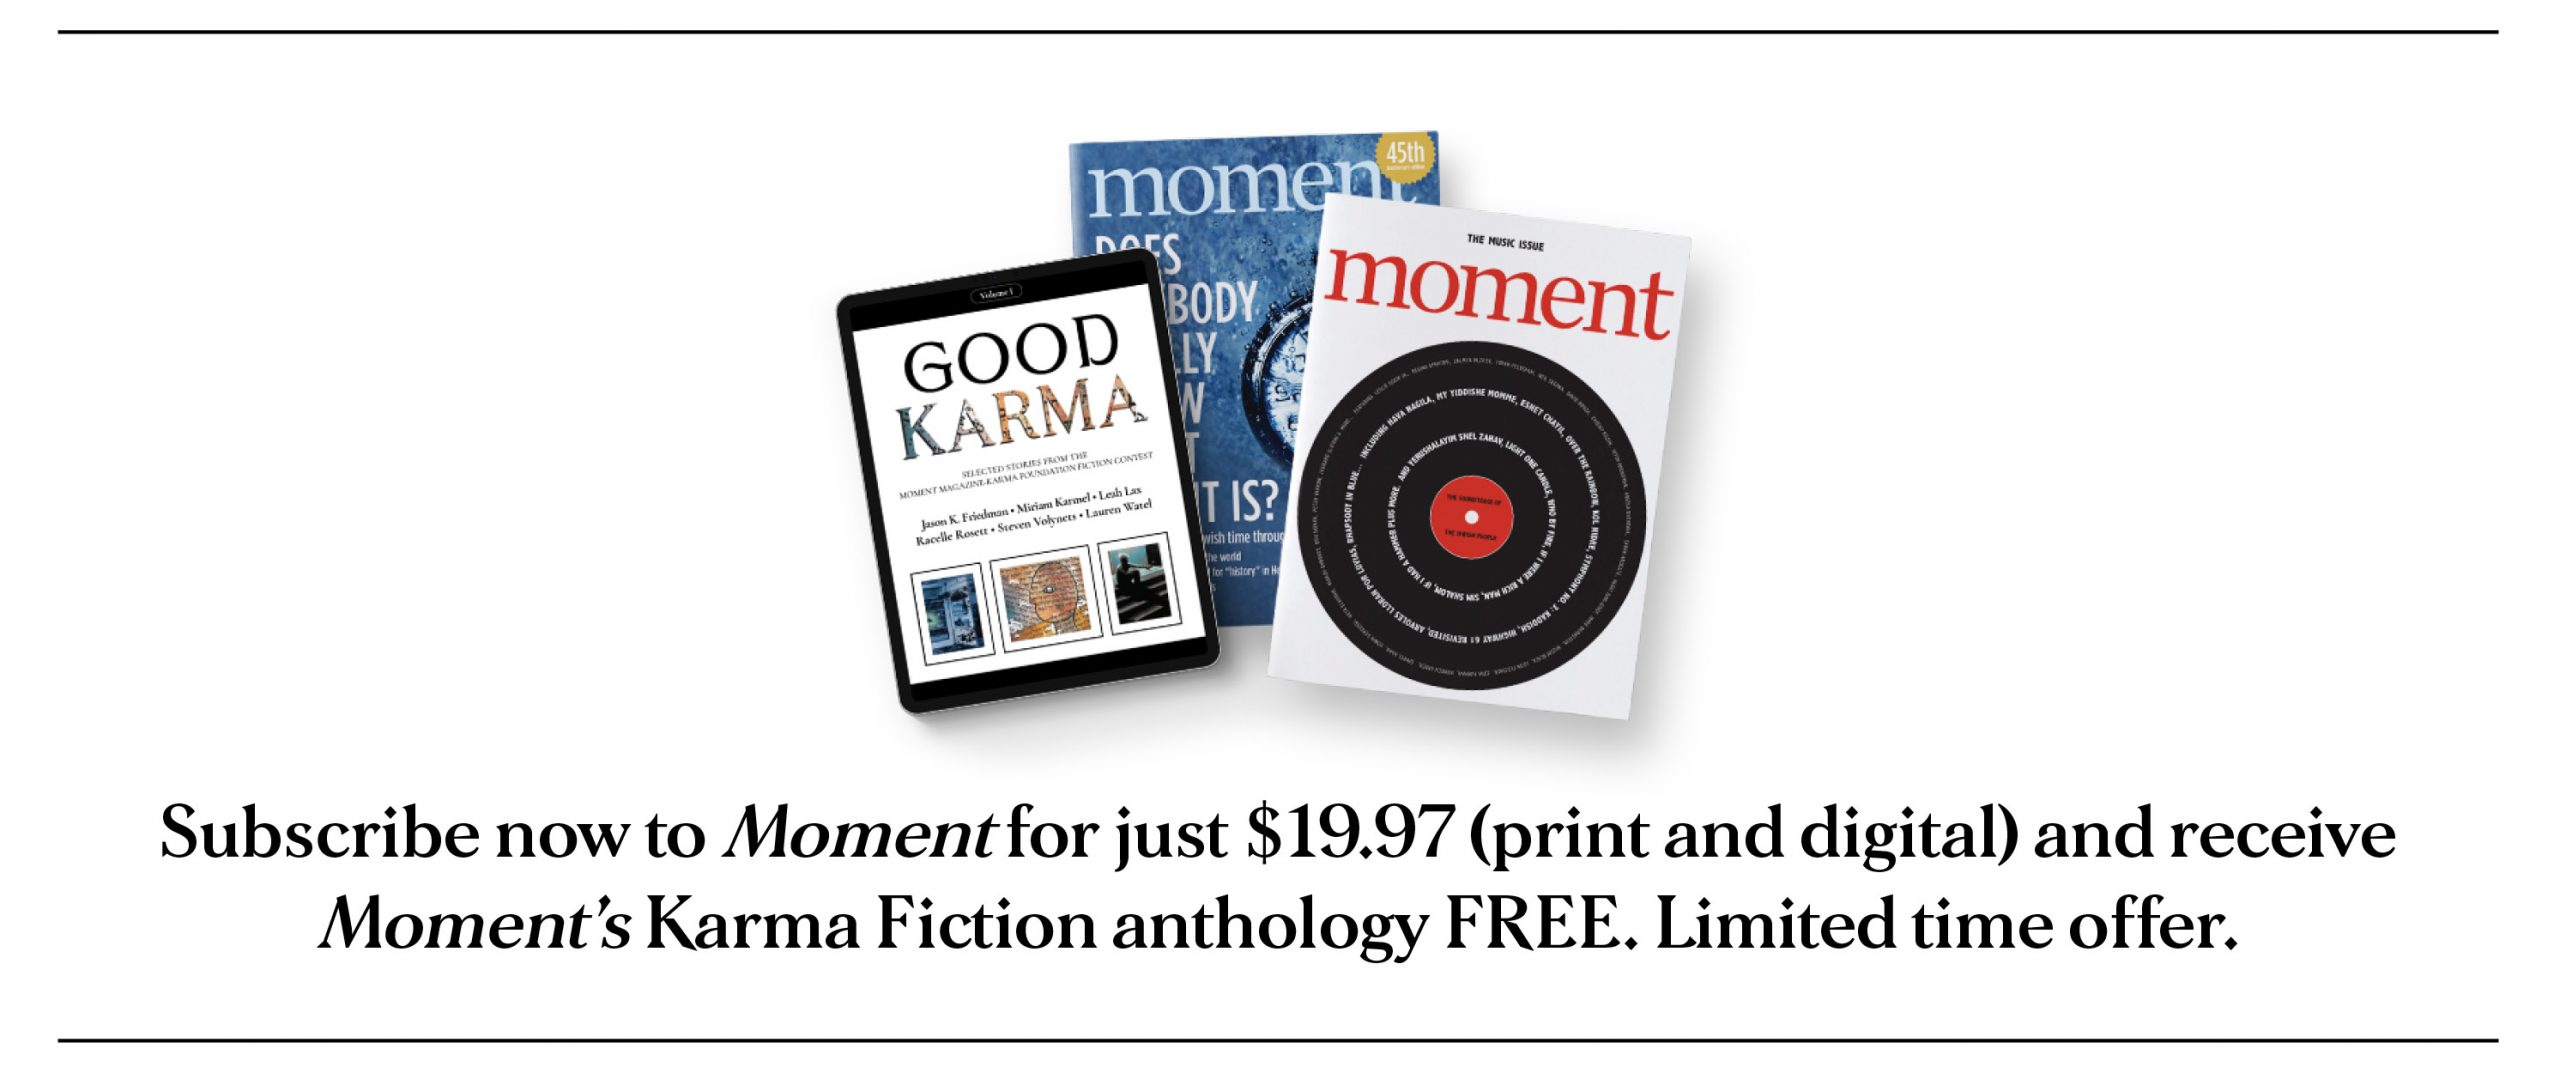 Moment for just $19.97...subscribe now and get Good Karma FREE